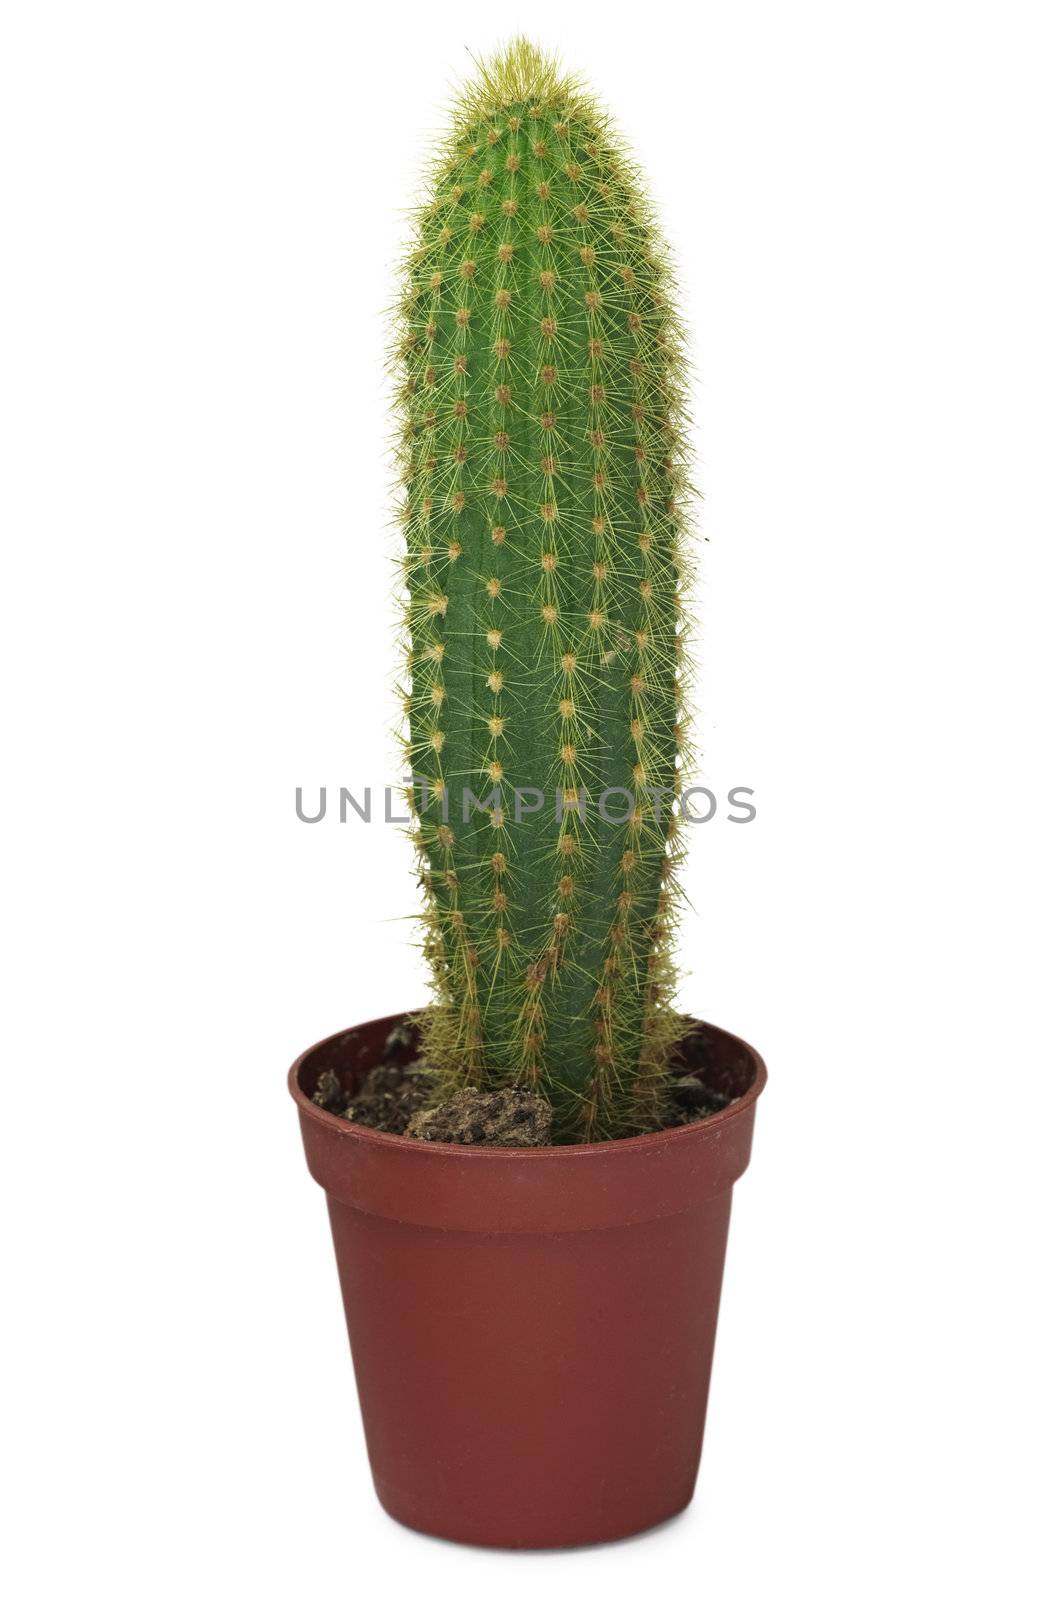 Long cactus in a brown pot is isolated on a white background